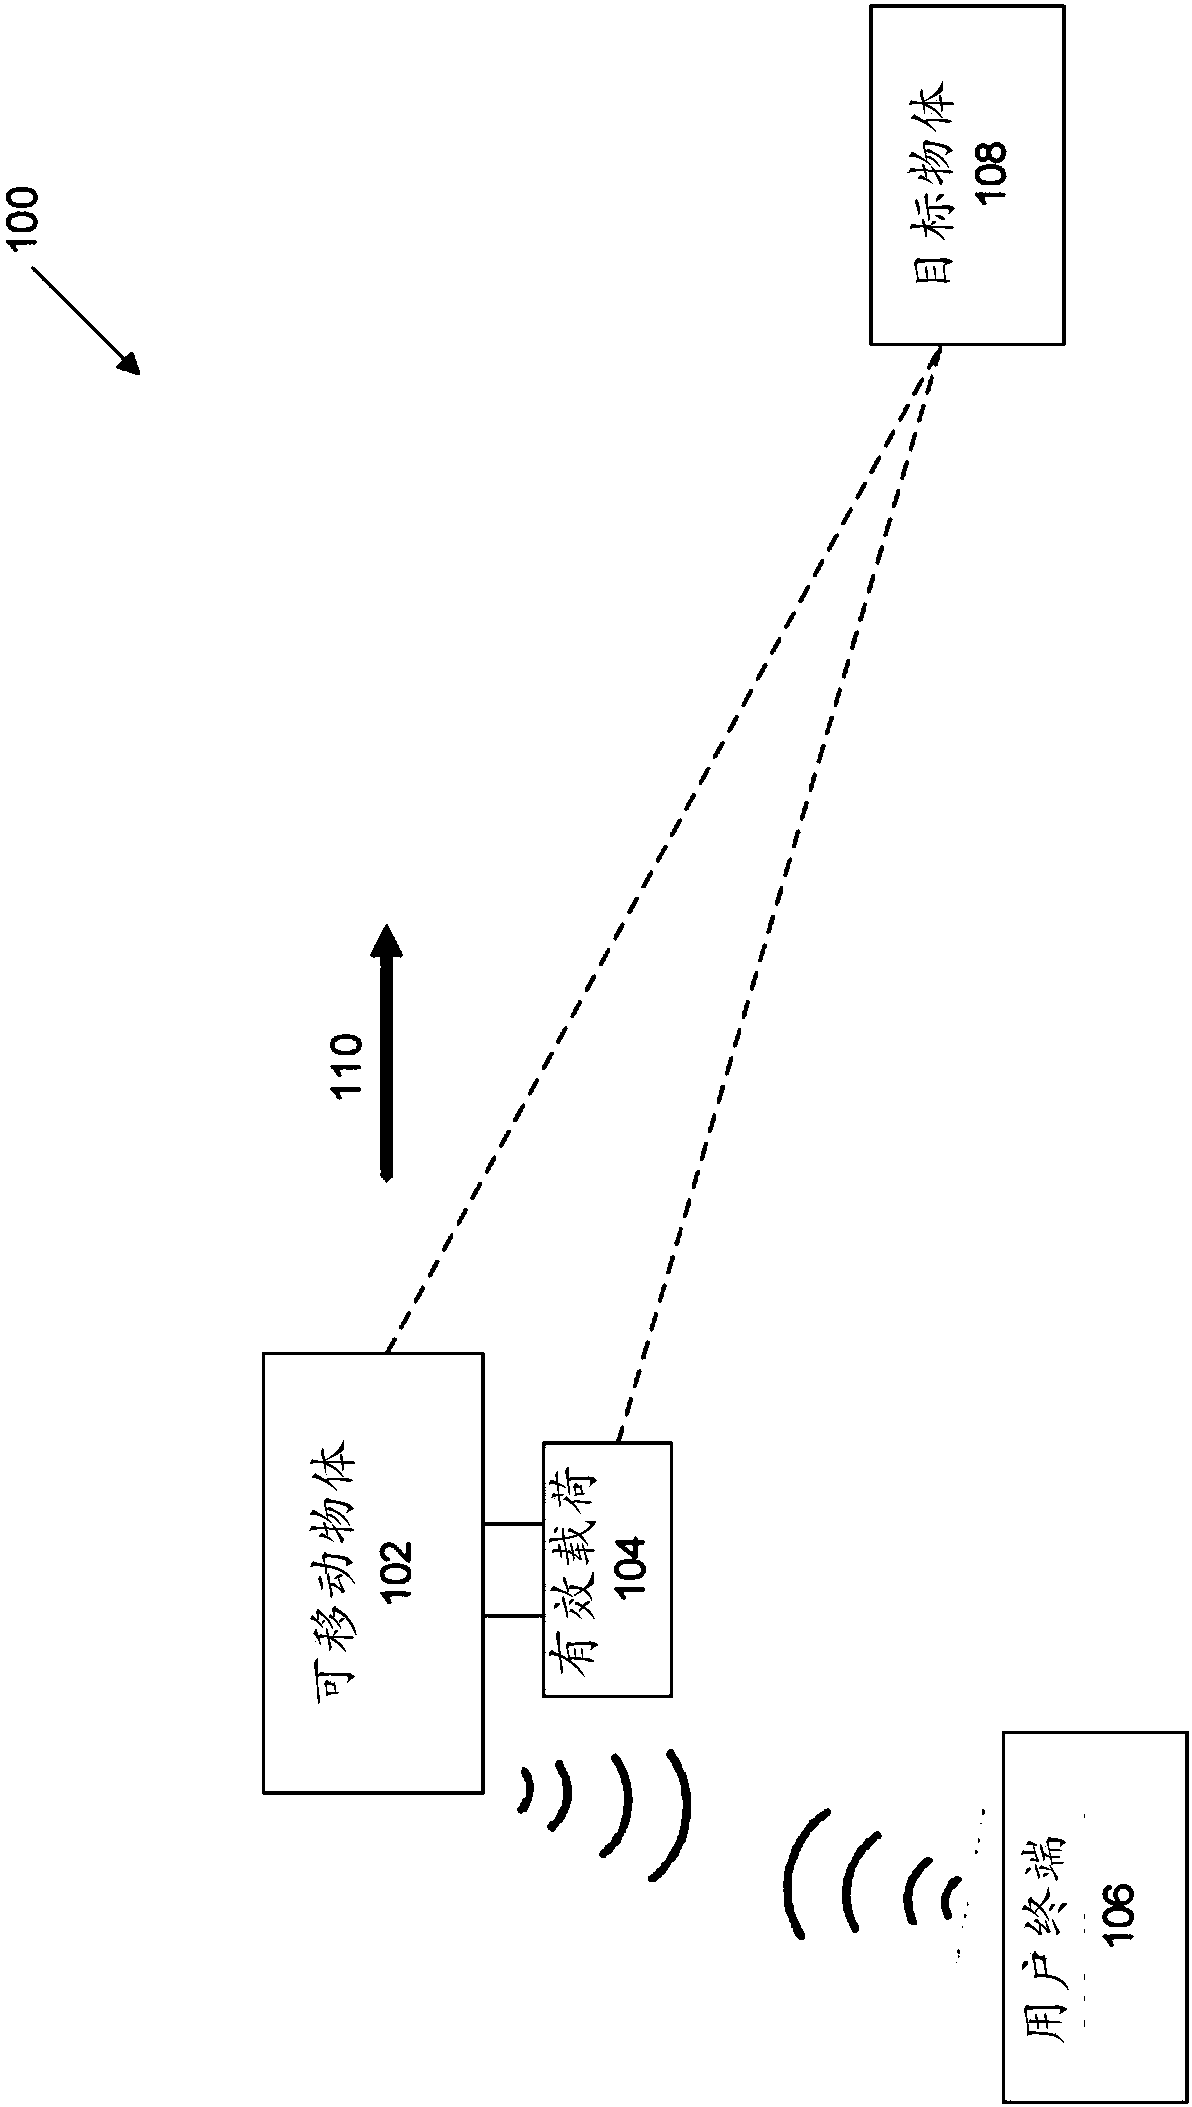 Systems and methods for UAV flight control